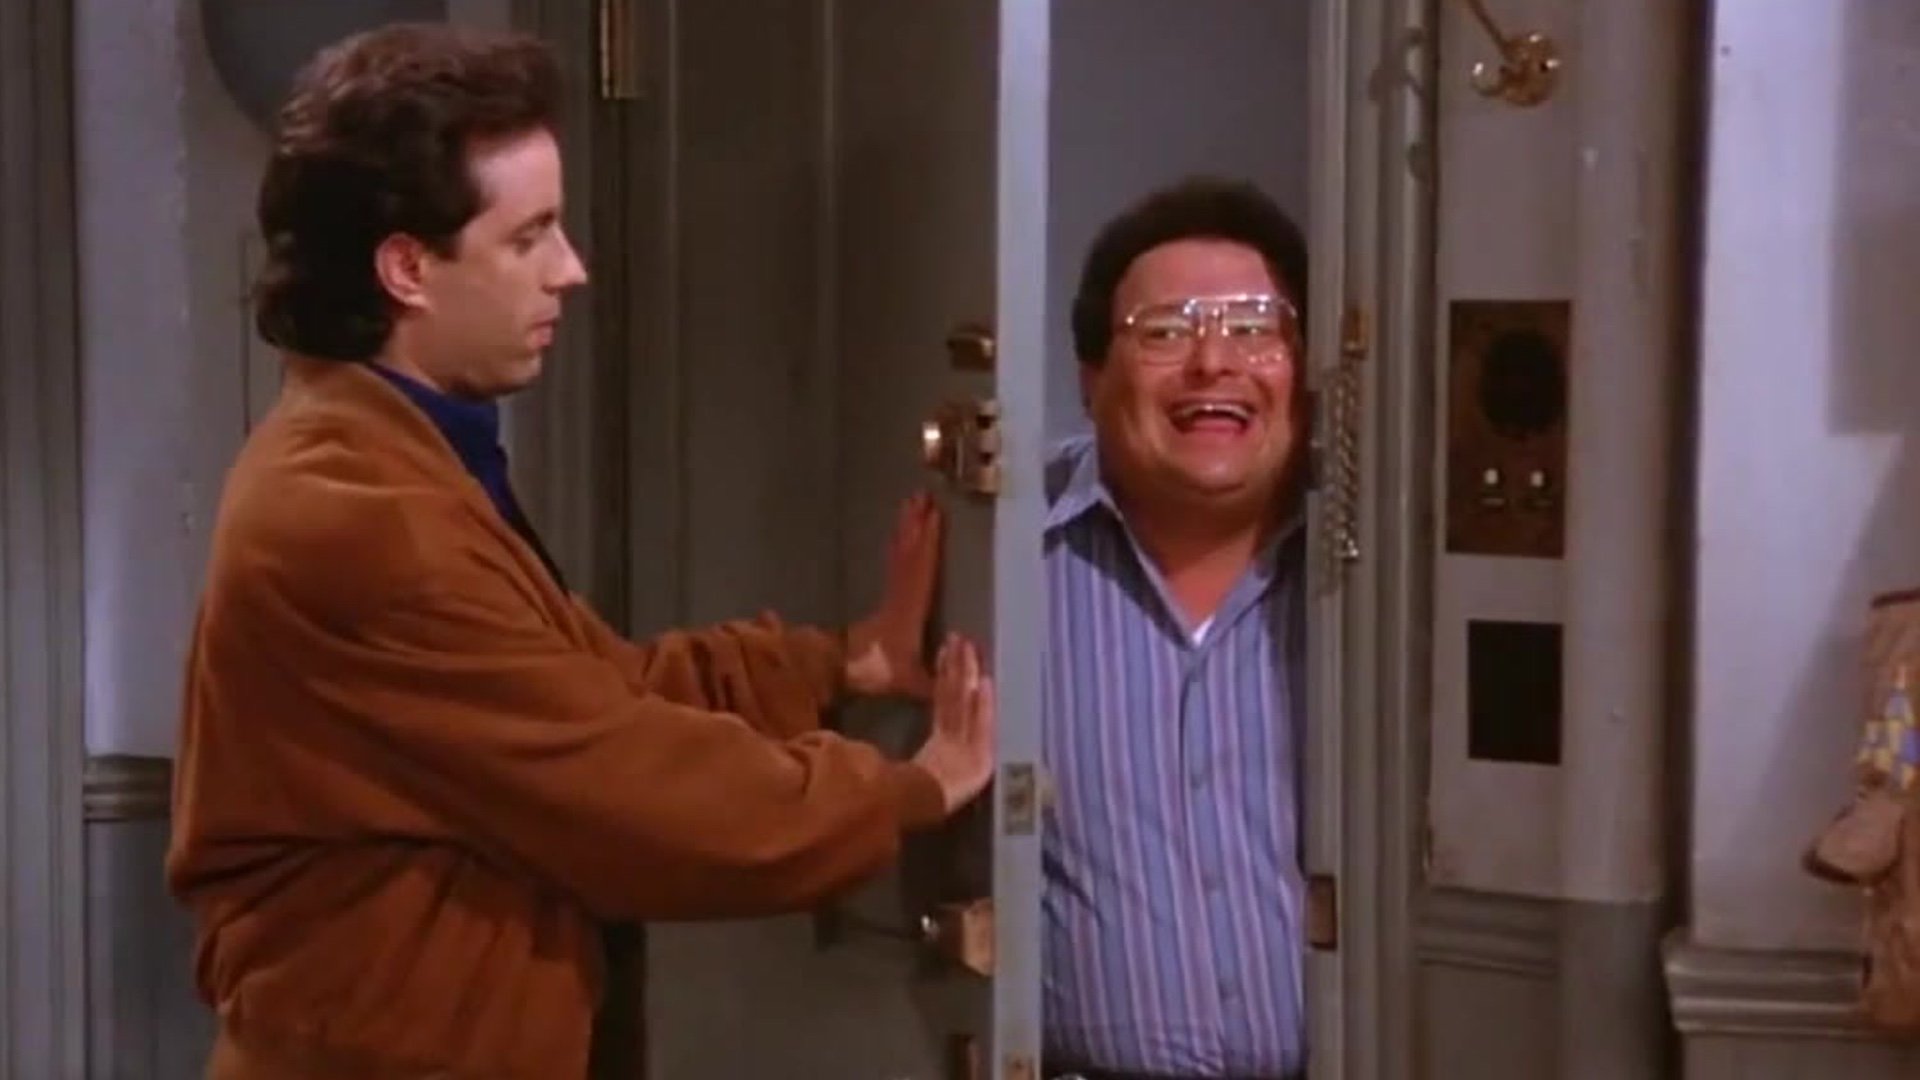 jerry-seinfeld-there-was-never-a-real-reason-why-jerry-hated-newman-on-seinfeld-but-the-storyline-just-seemed-funny.jpg